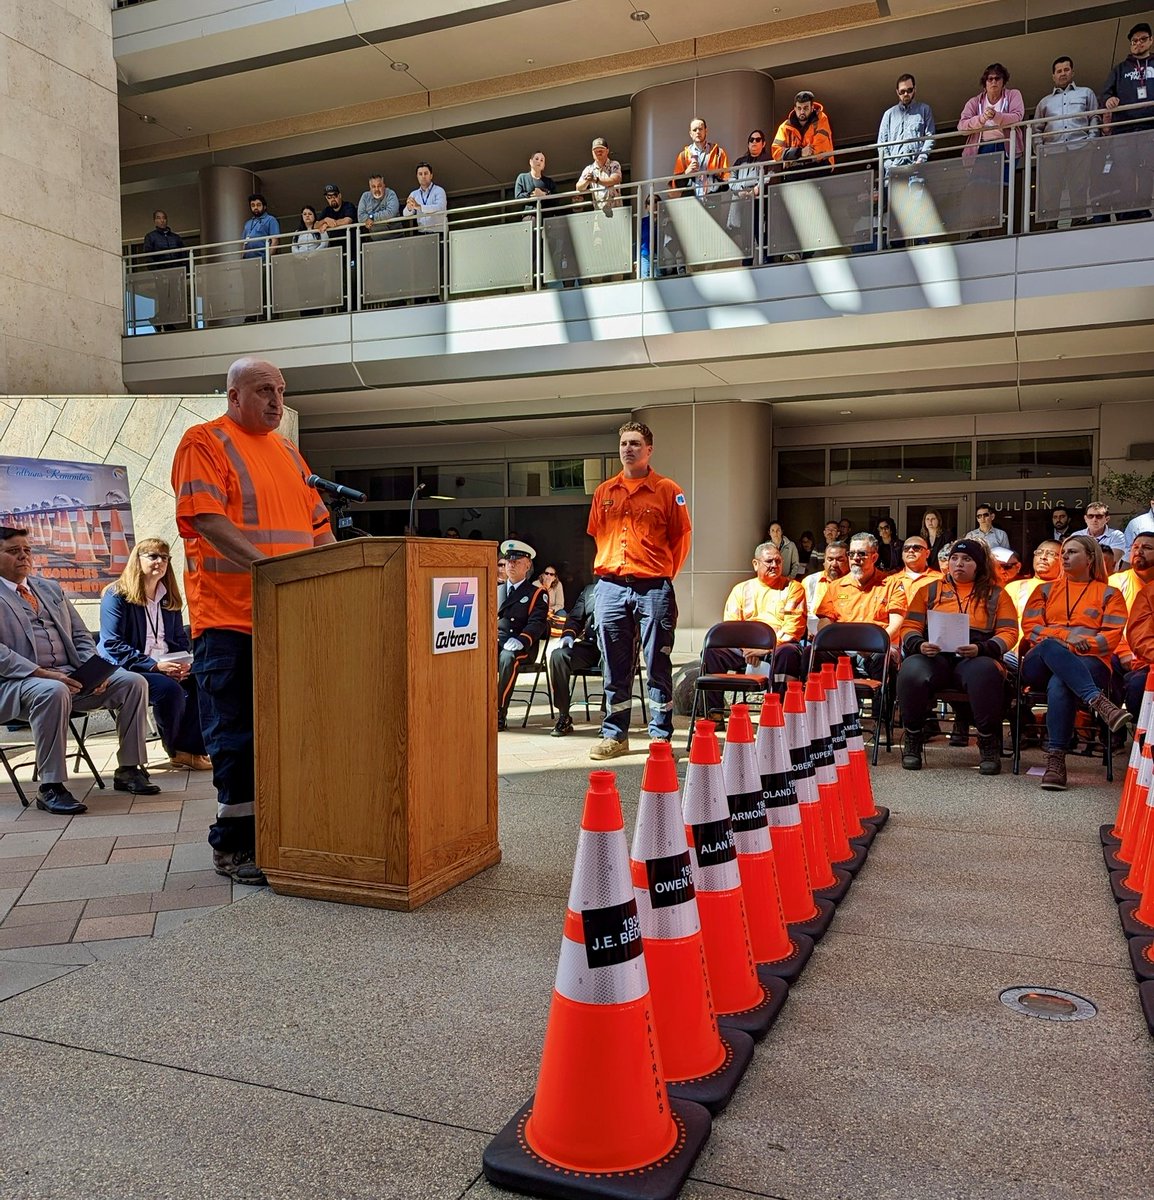 Since 1921, 193 @CaltransHQ employees have lost their lives in the line of duty. #TeamToni joined @SDCaltrans at the annual Highway Worker Memorial ceremony to honor fallen workers. Road safety is our shared responsibility to prevent accidents & save lives. #WorkZoneAwarenessWeek